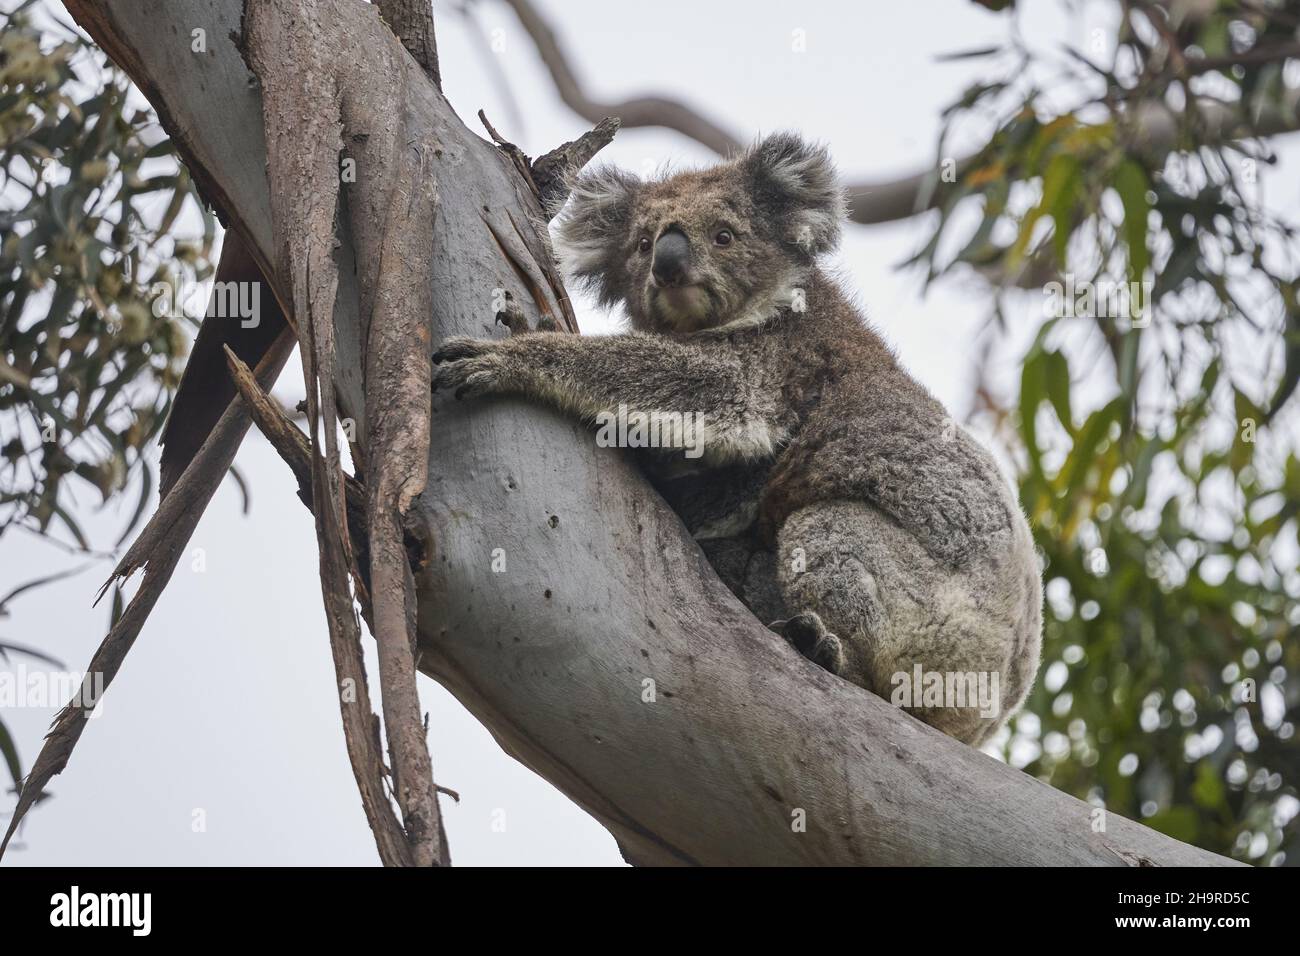 Cute koala with its baby at Kennett River, Great Ocean Road, Victoria Stock Photo